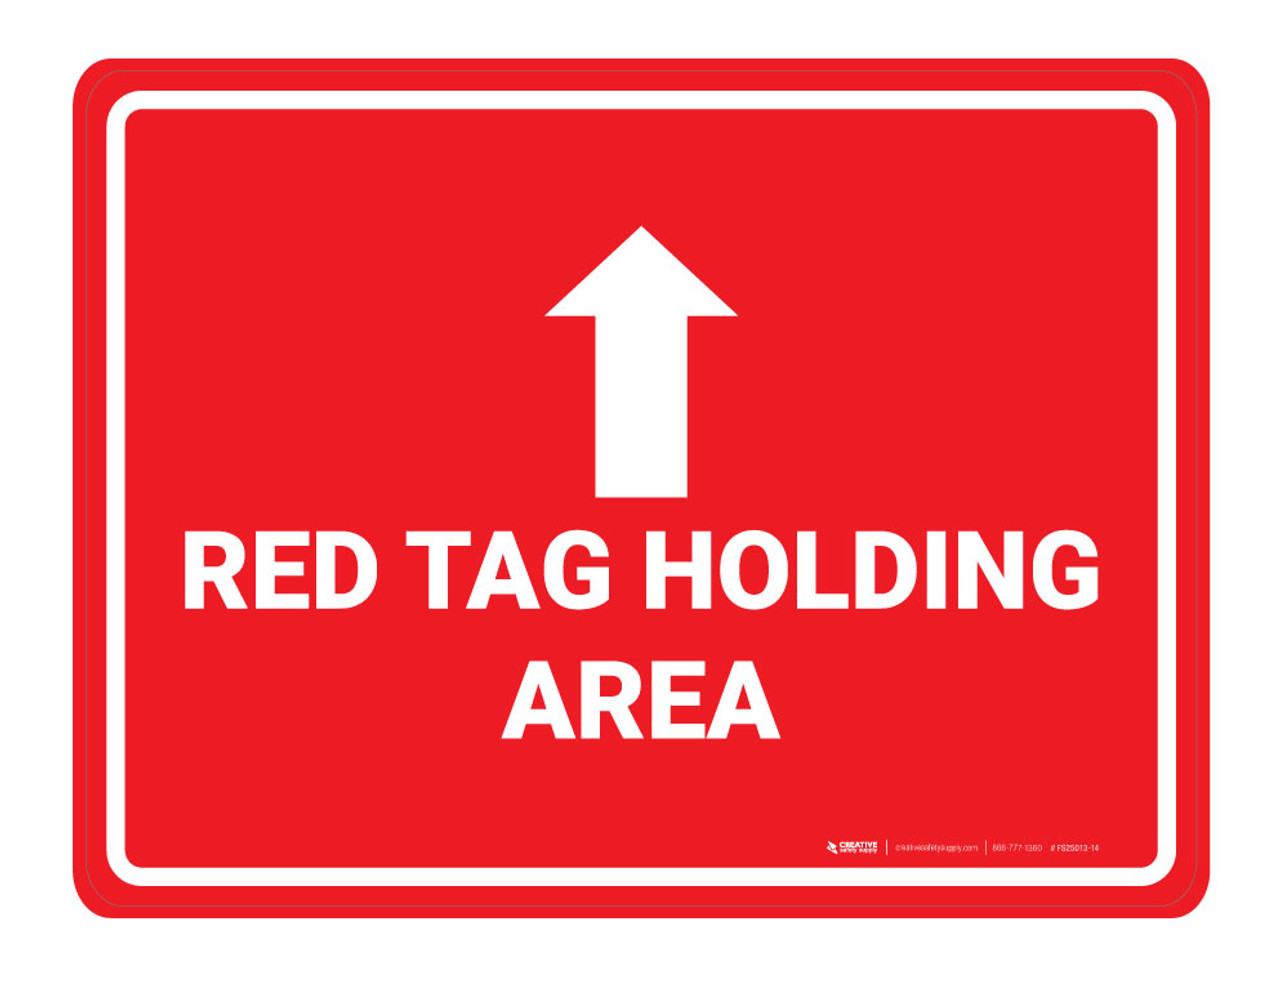 5S Red Tag Signs  Creative Safety Supply